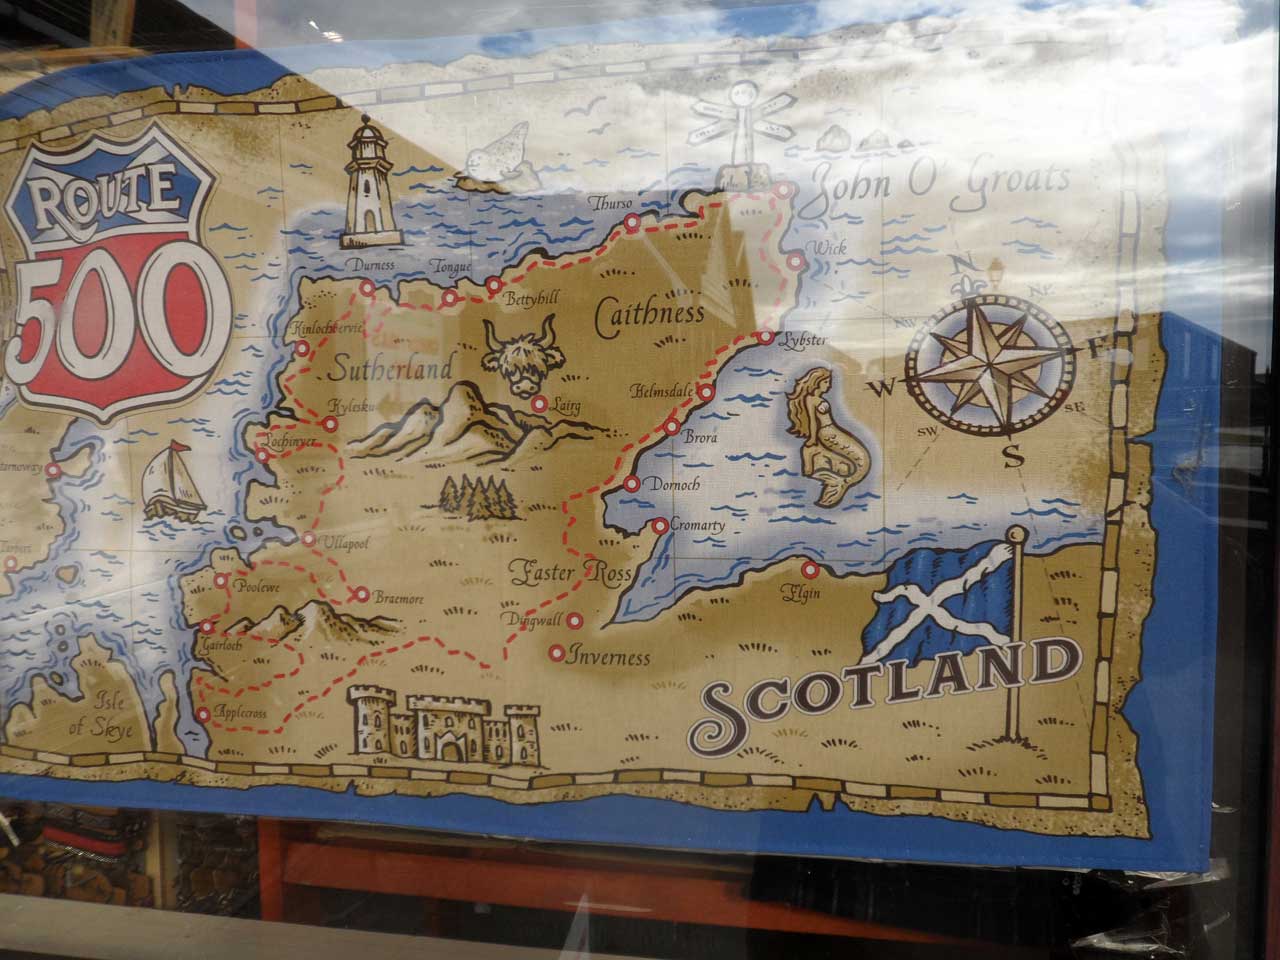 Photo: John O'Groats Getting Busier After The Pandemic